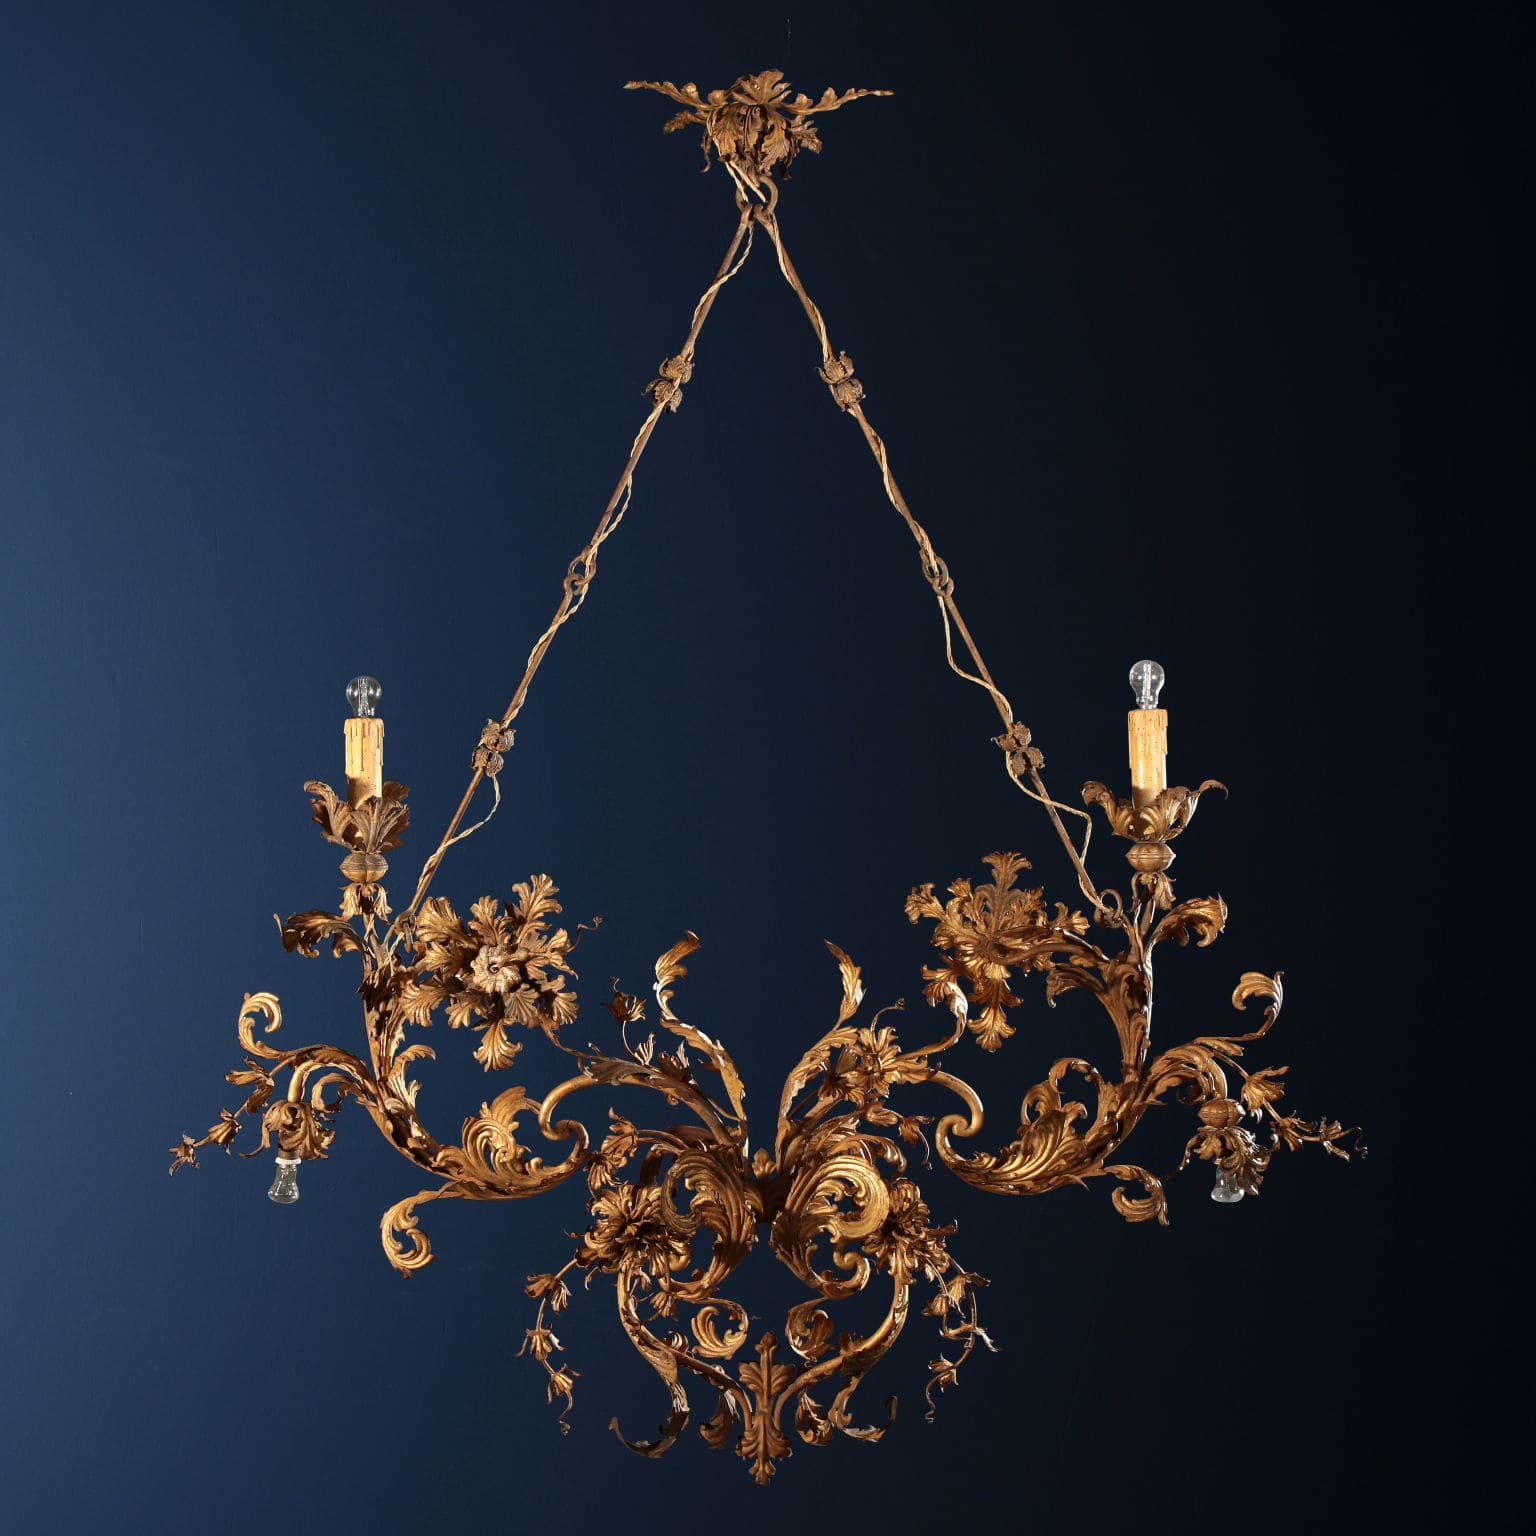 Chandelier from the early 18th century